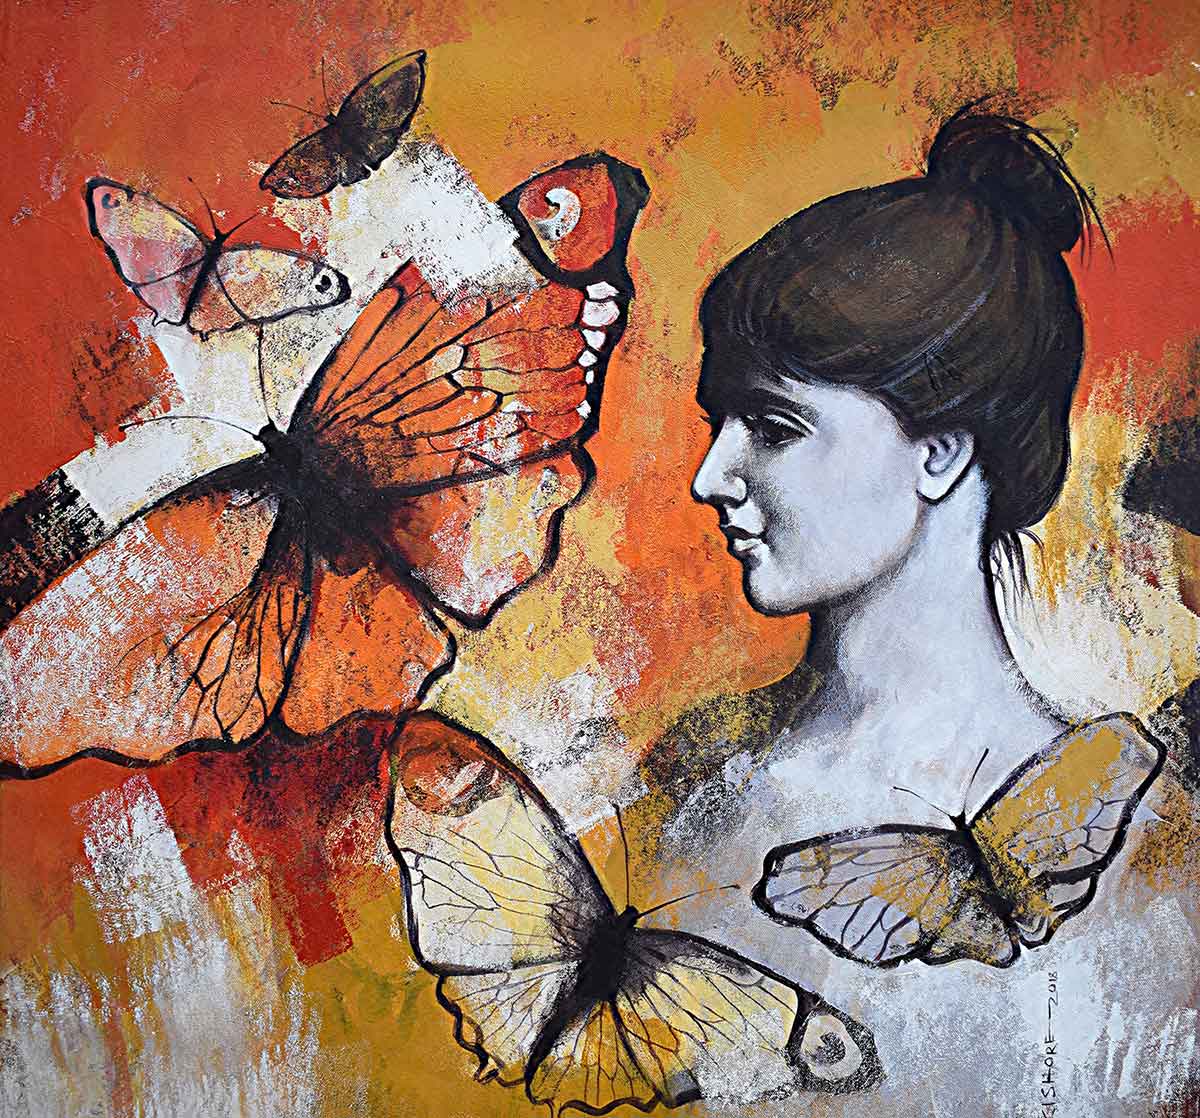 Figurative Painting with Acrylic on Canvas "Freedom of Beauty-3" art by Kishore Pratim Biswas